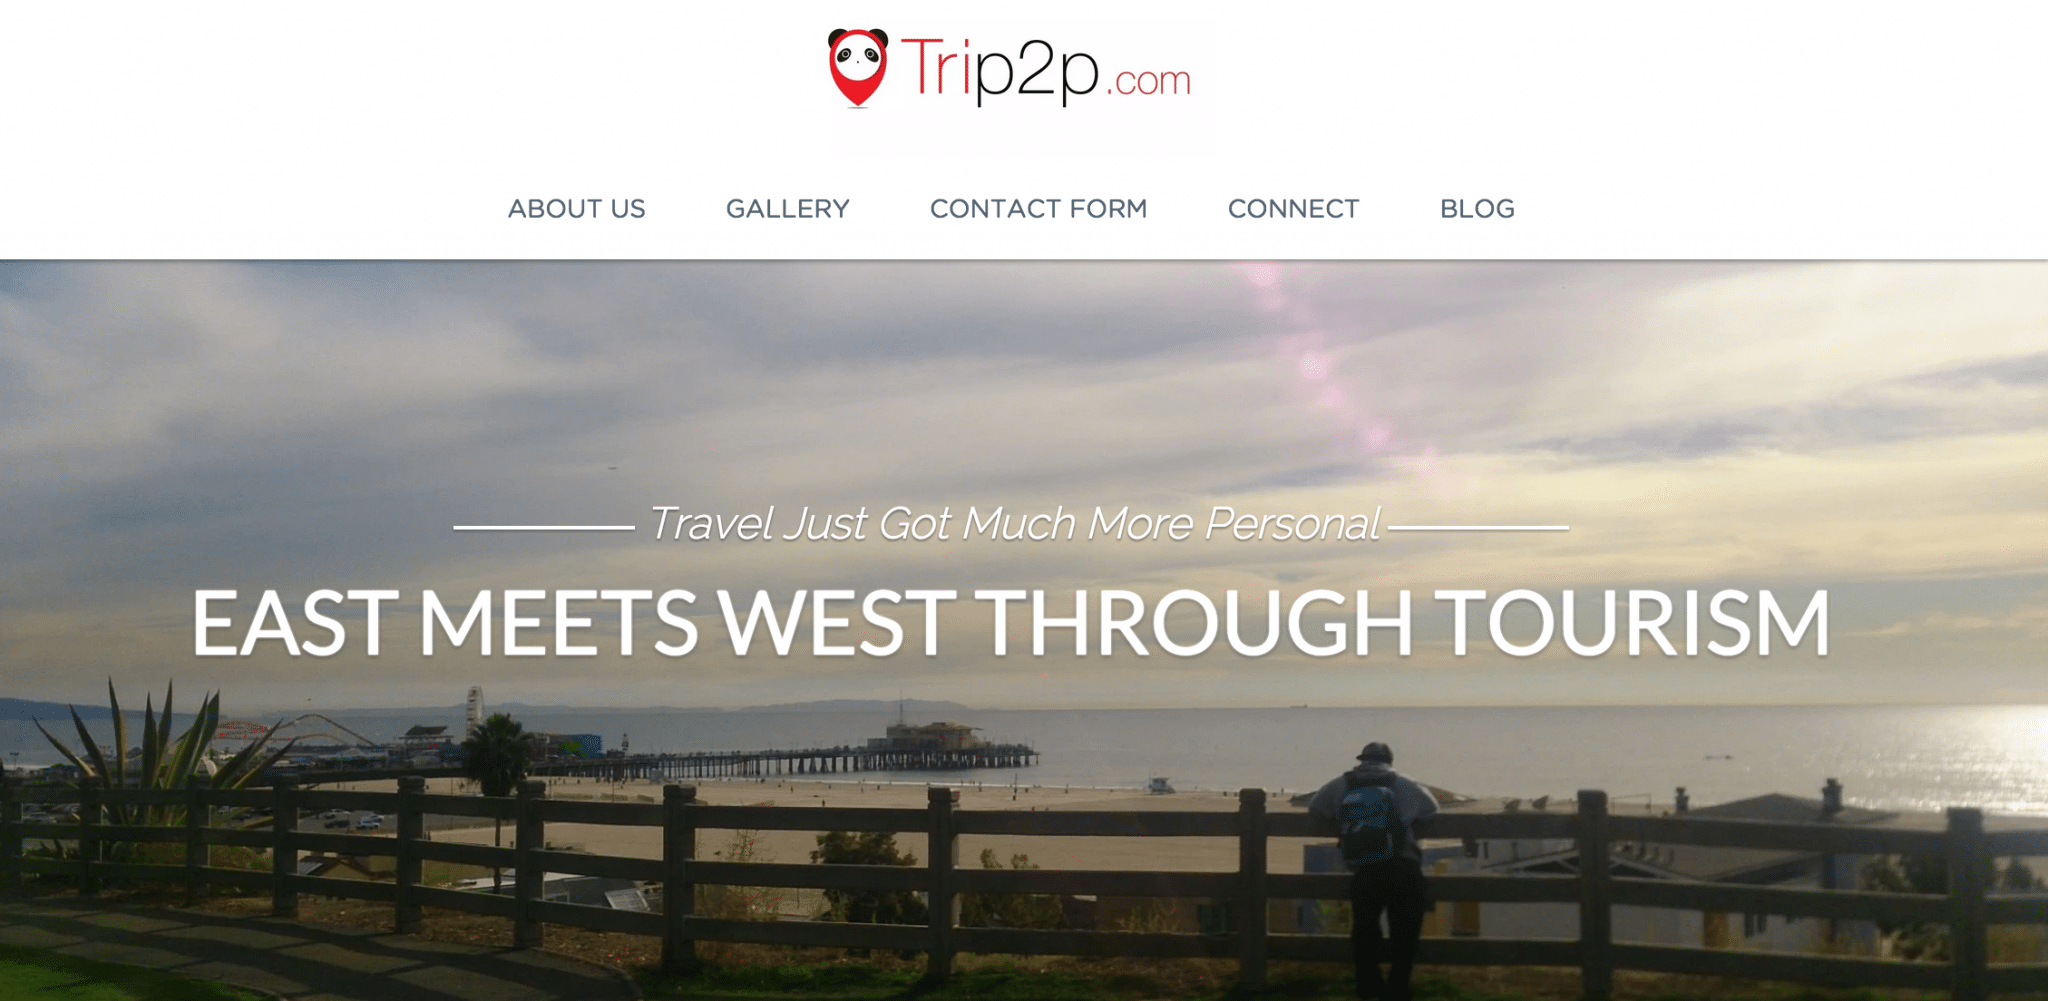 Trip2p is a trip planning site for Chinese tourists.